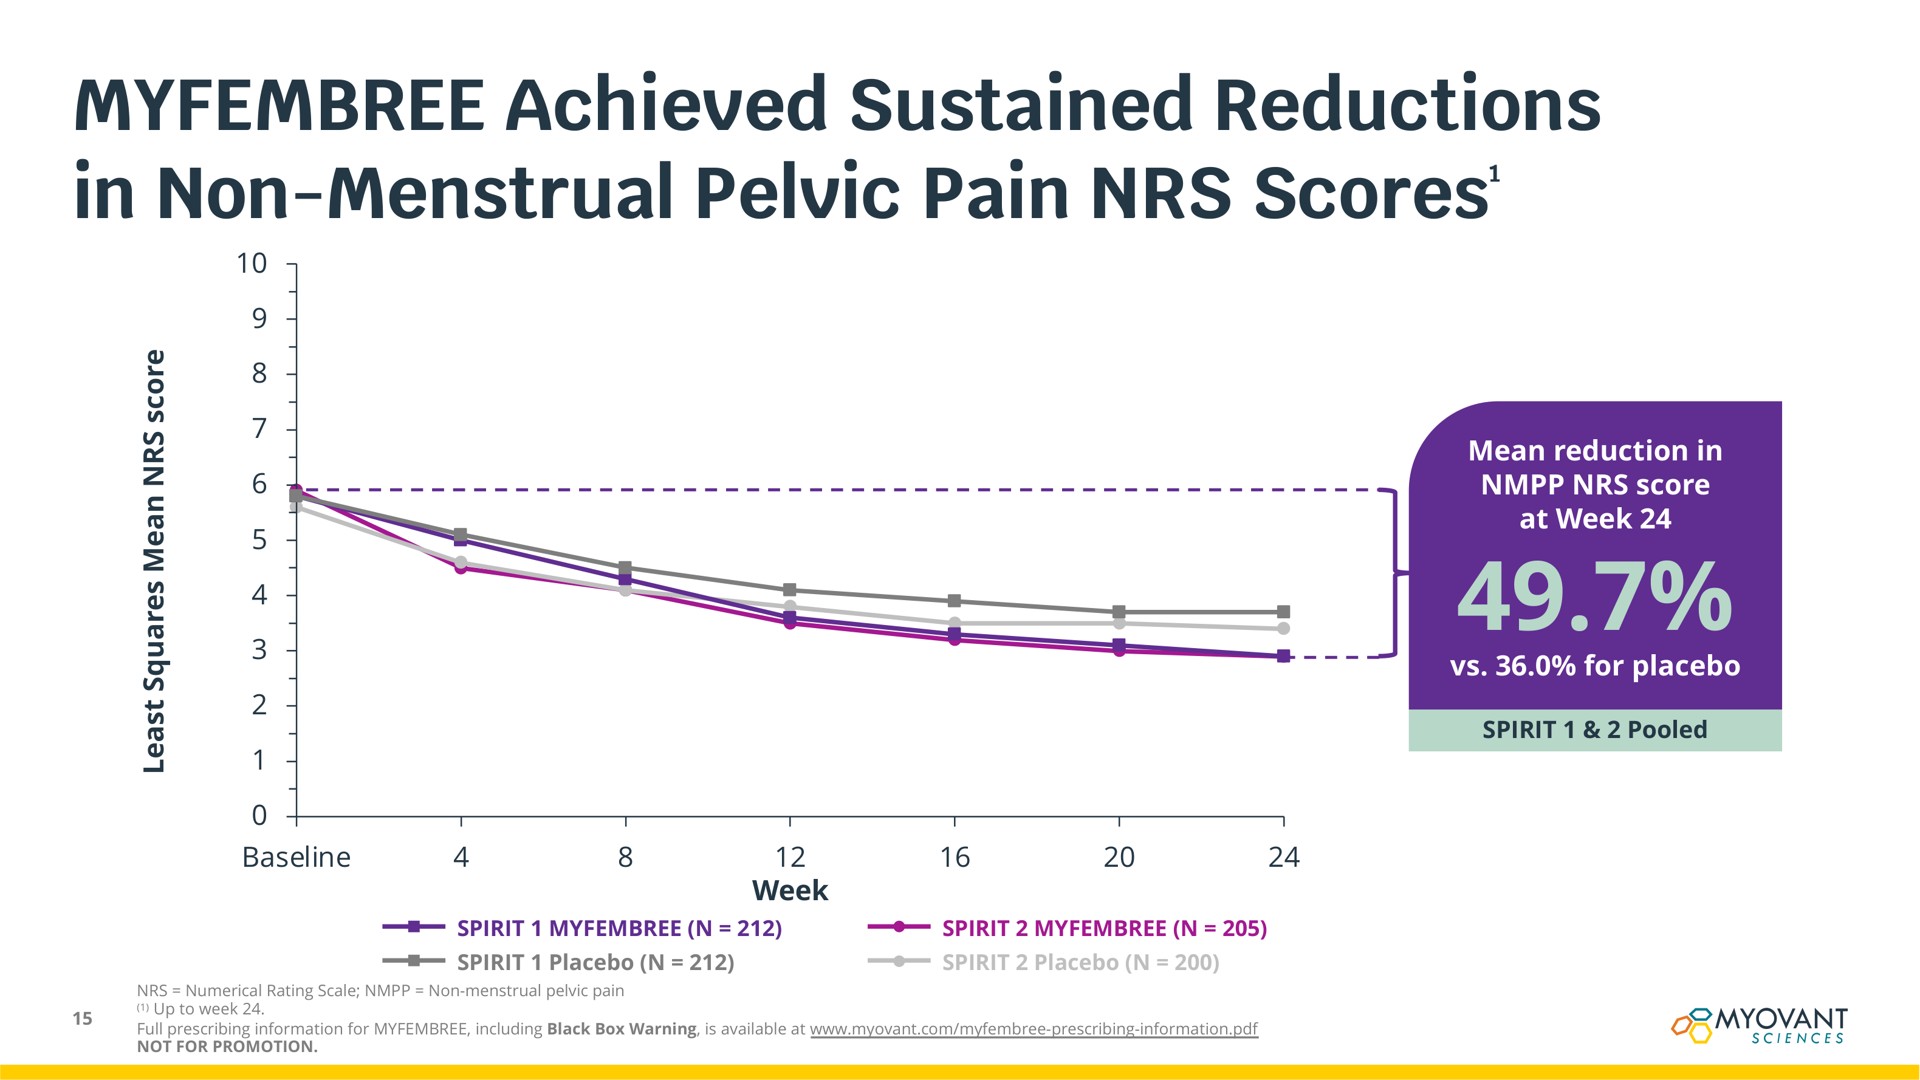 achieved sustained reductions in non menstrual pelvic pain scores scores | Myovant Sciences